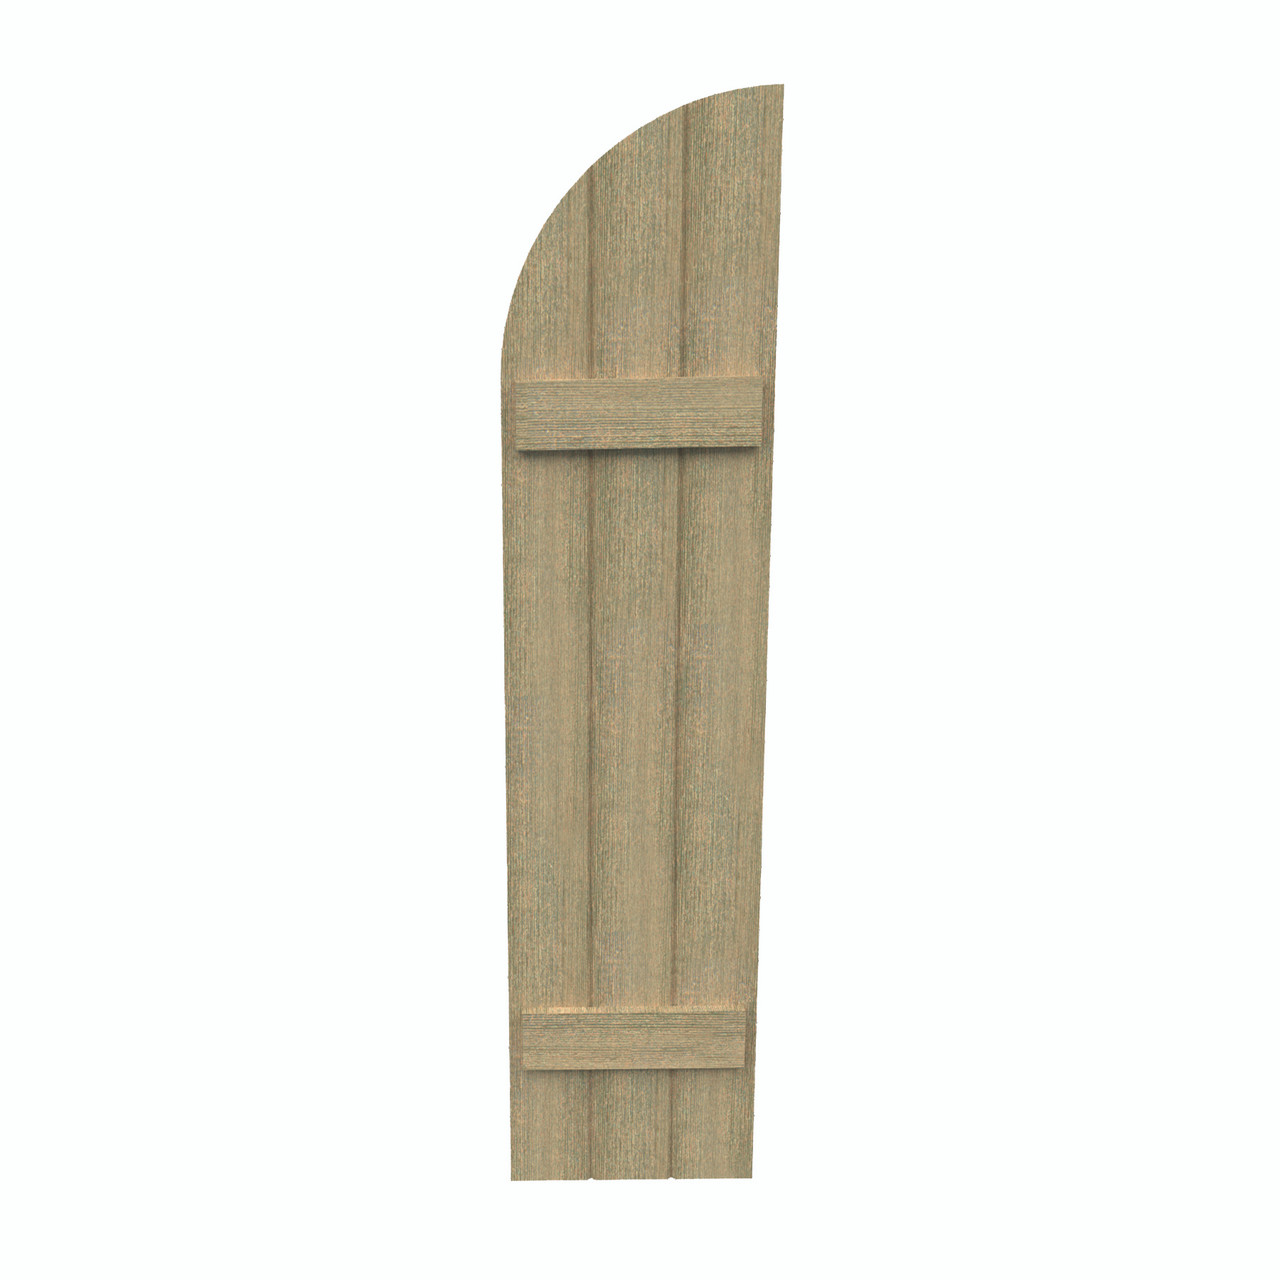 14 inch by 109 inch Quarter Round Shutter with 3-Boards